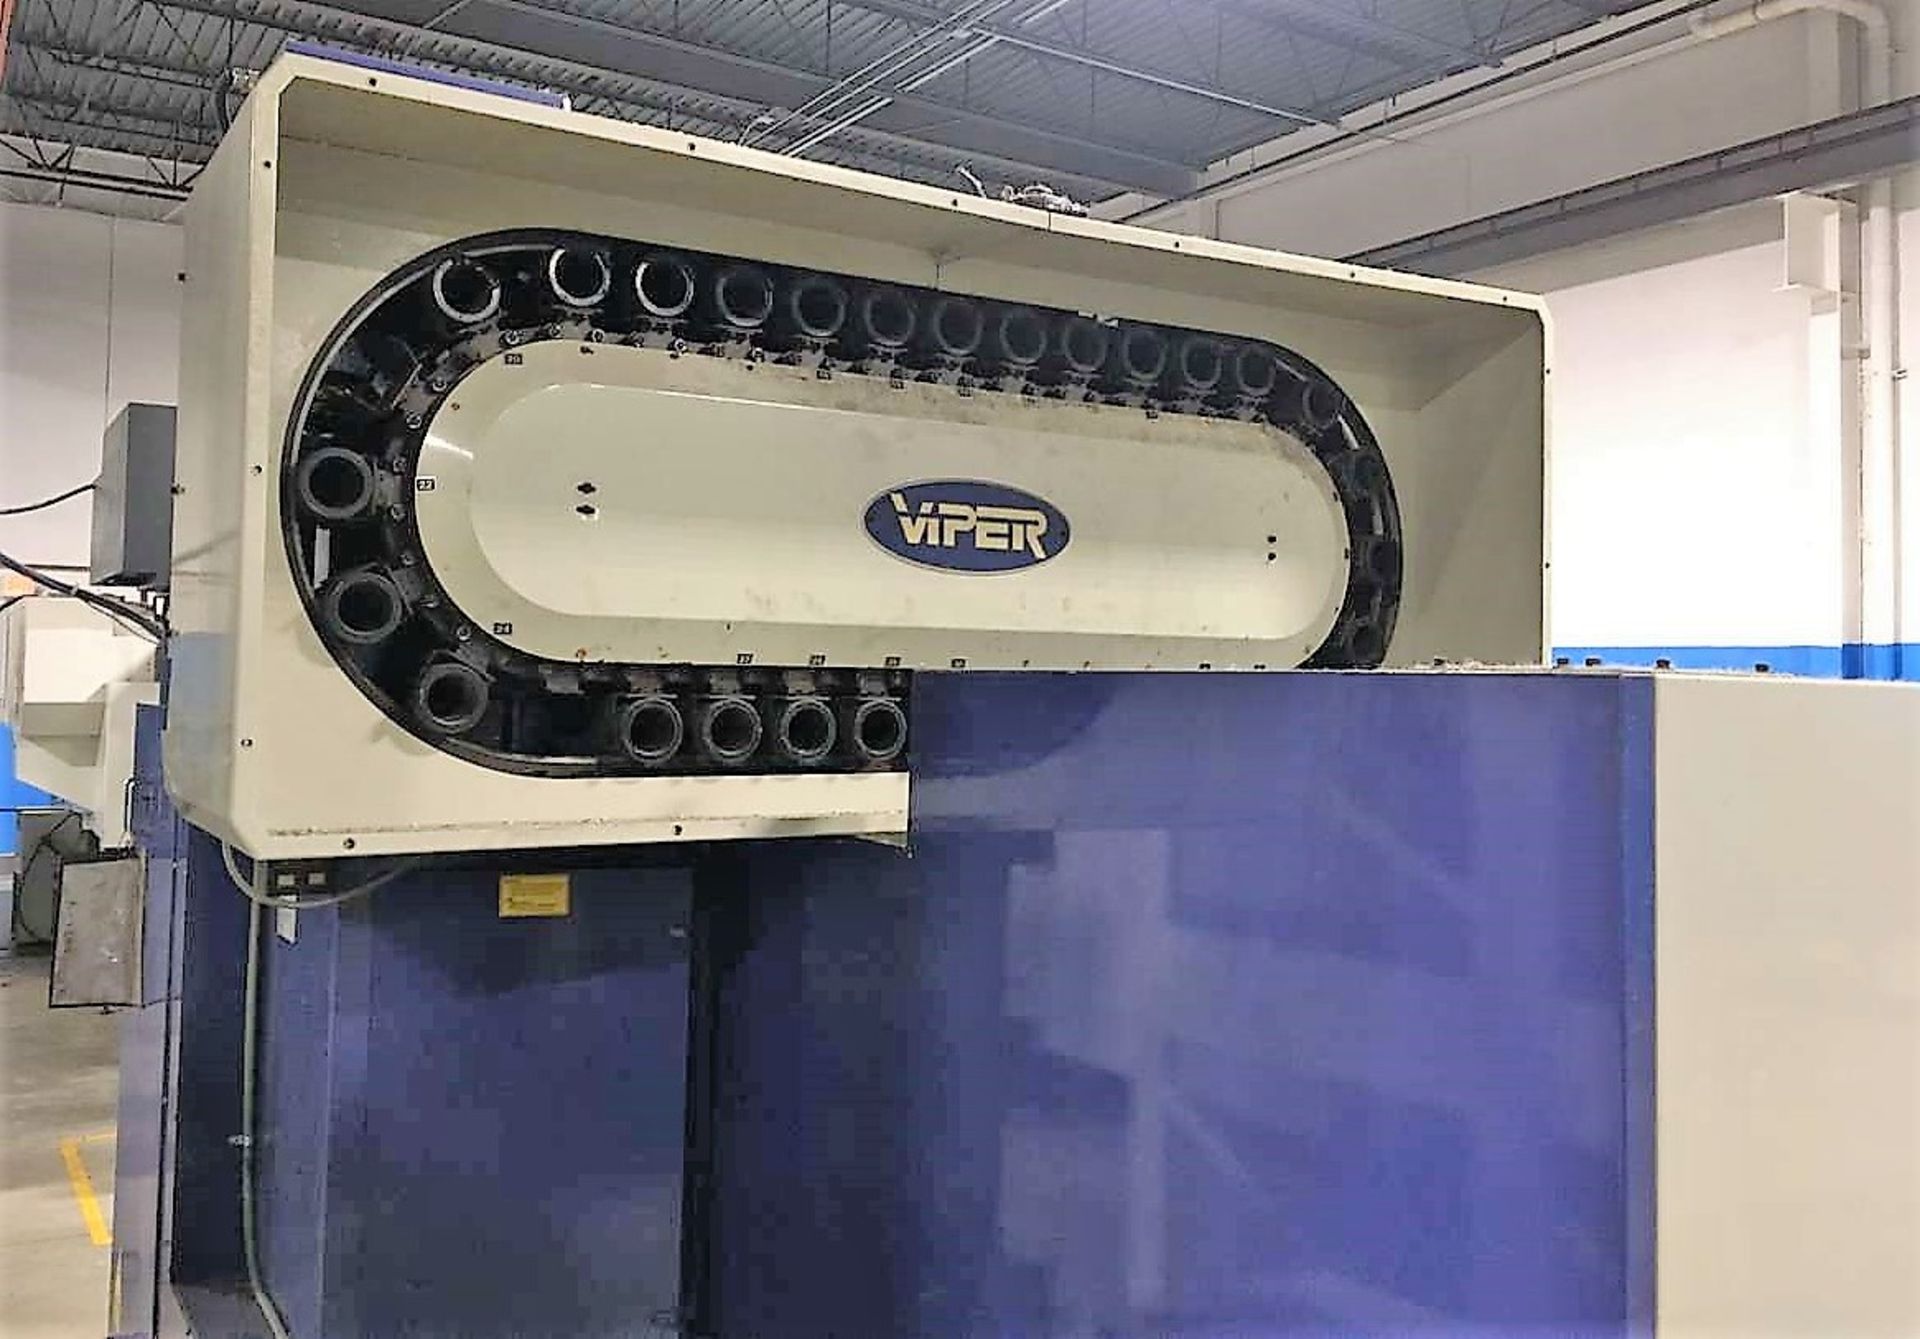 63"X30" MIGHTY VIPER VMC 1500AG/HV-70A CNC VERTICAL MACHINING CENTER, S/N 2755 - Image 6 of 7